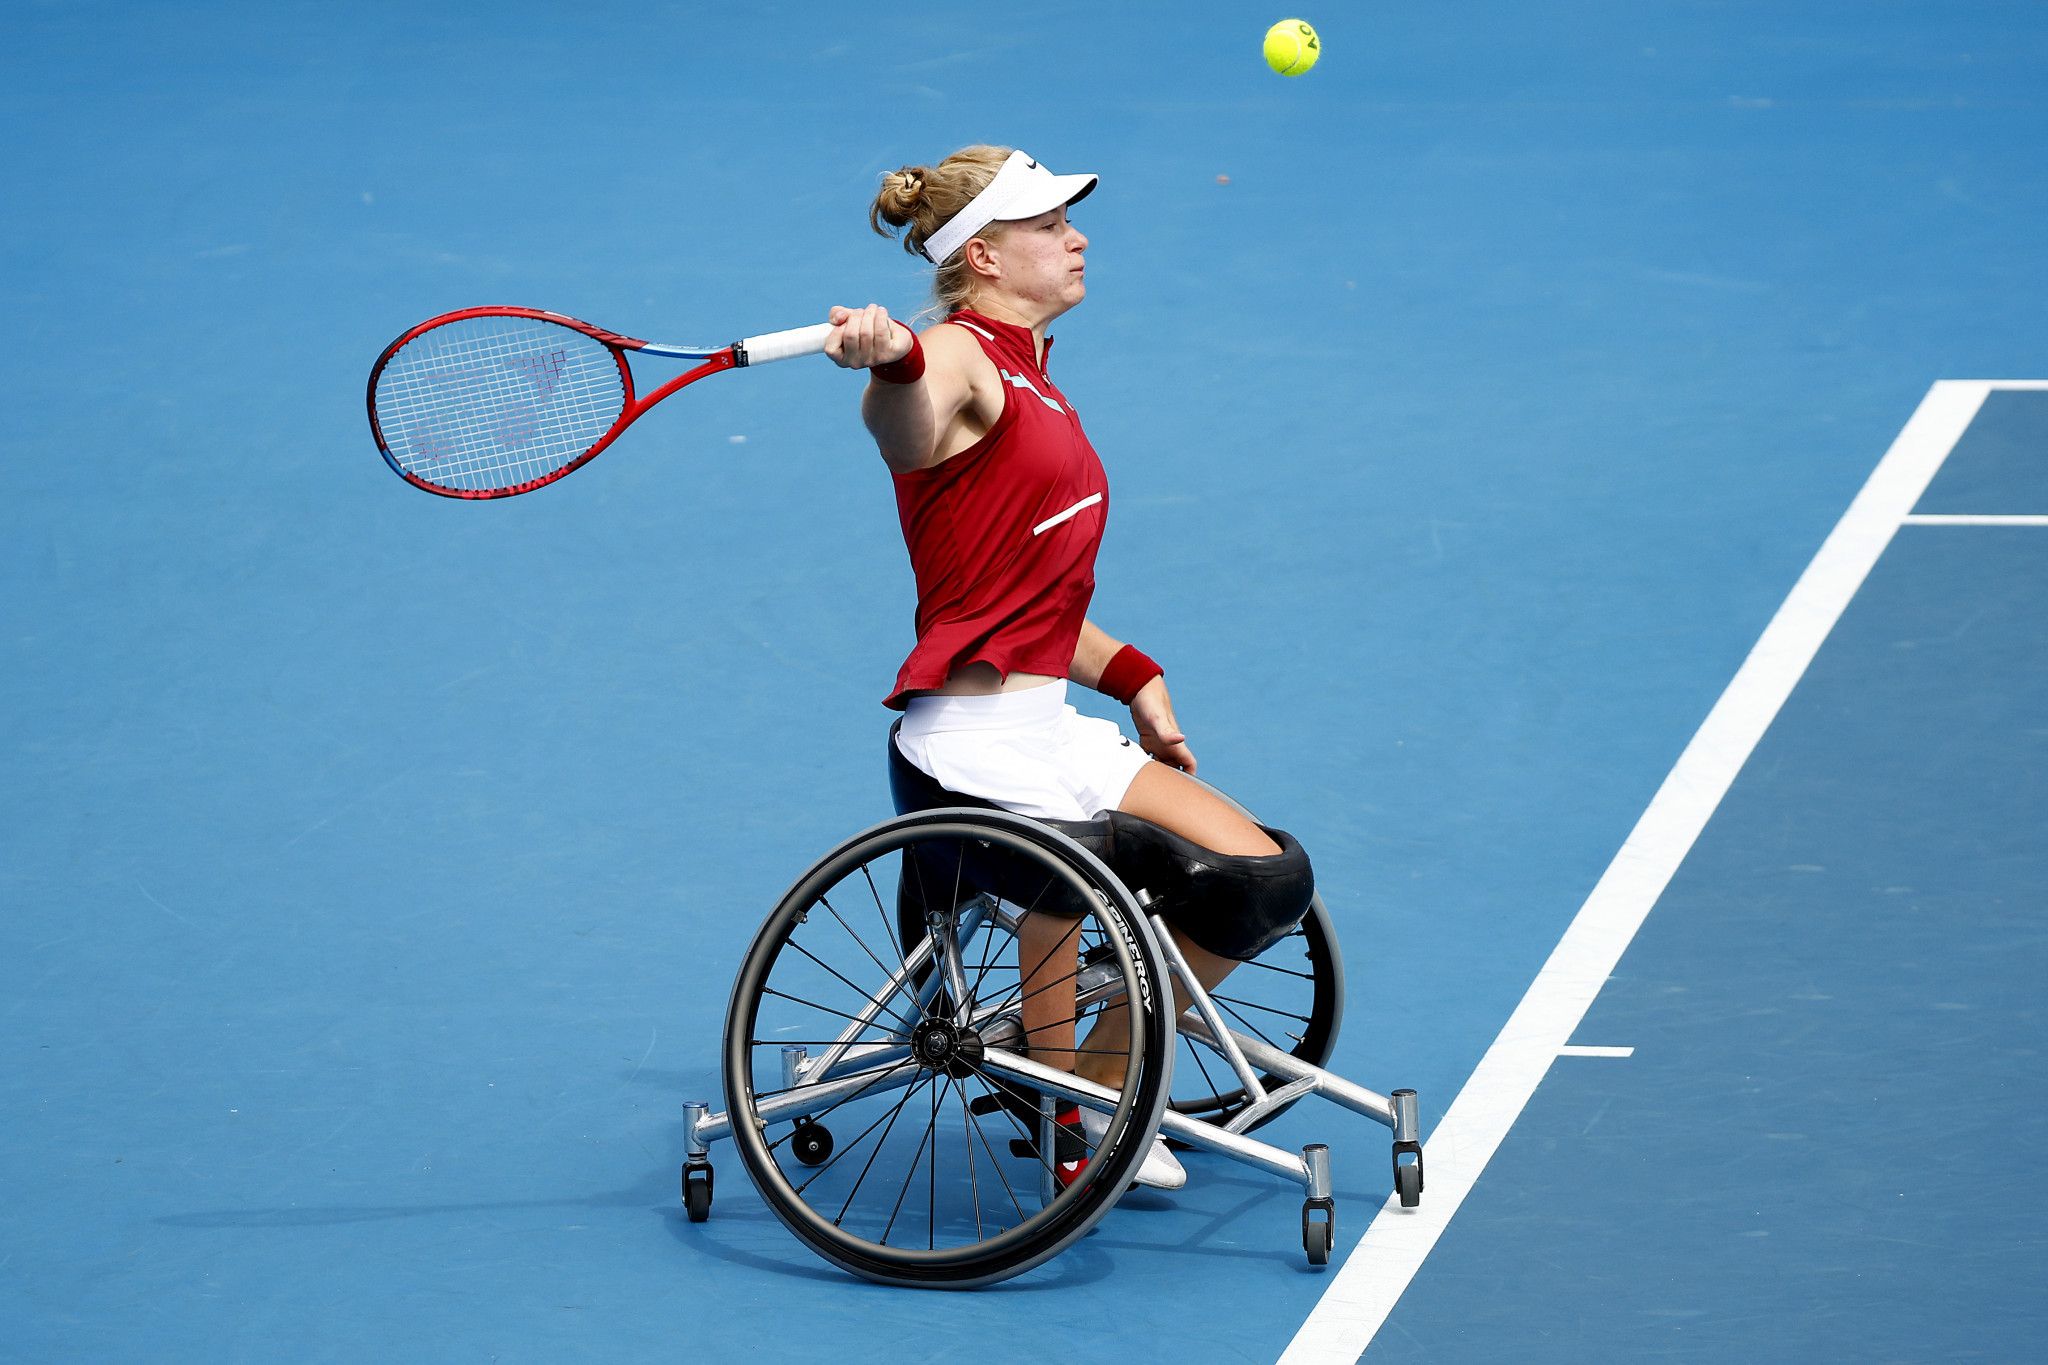 In an all-Dutch women's wheelchair singles final, Paralympic champion Diede de Groot triumphed 6-1, 6-1 over Aniek van Koot ©Getty Images